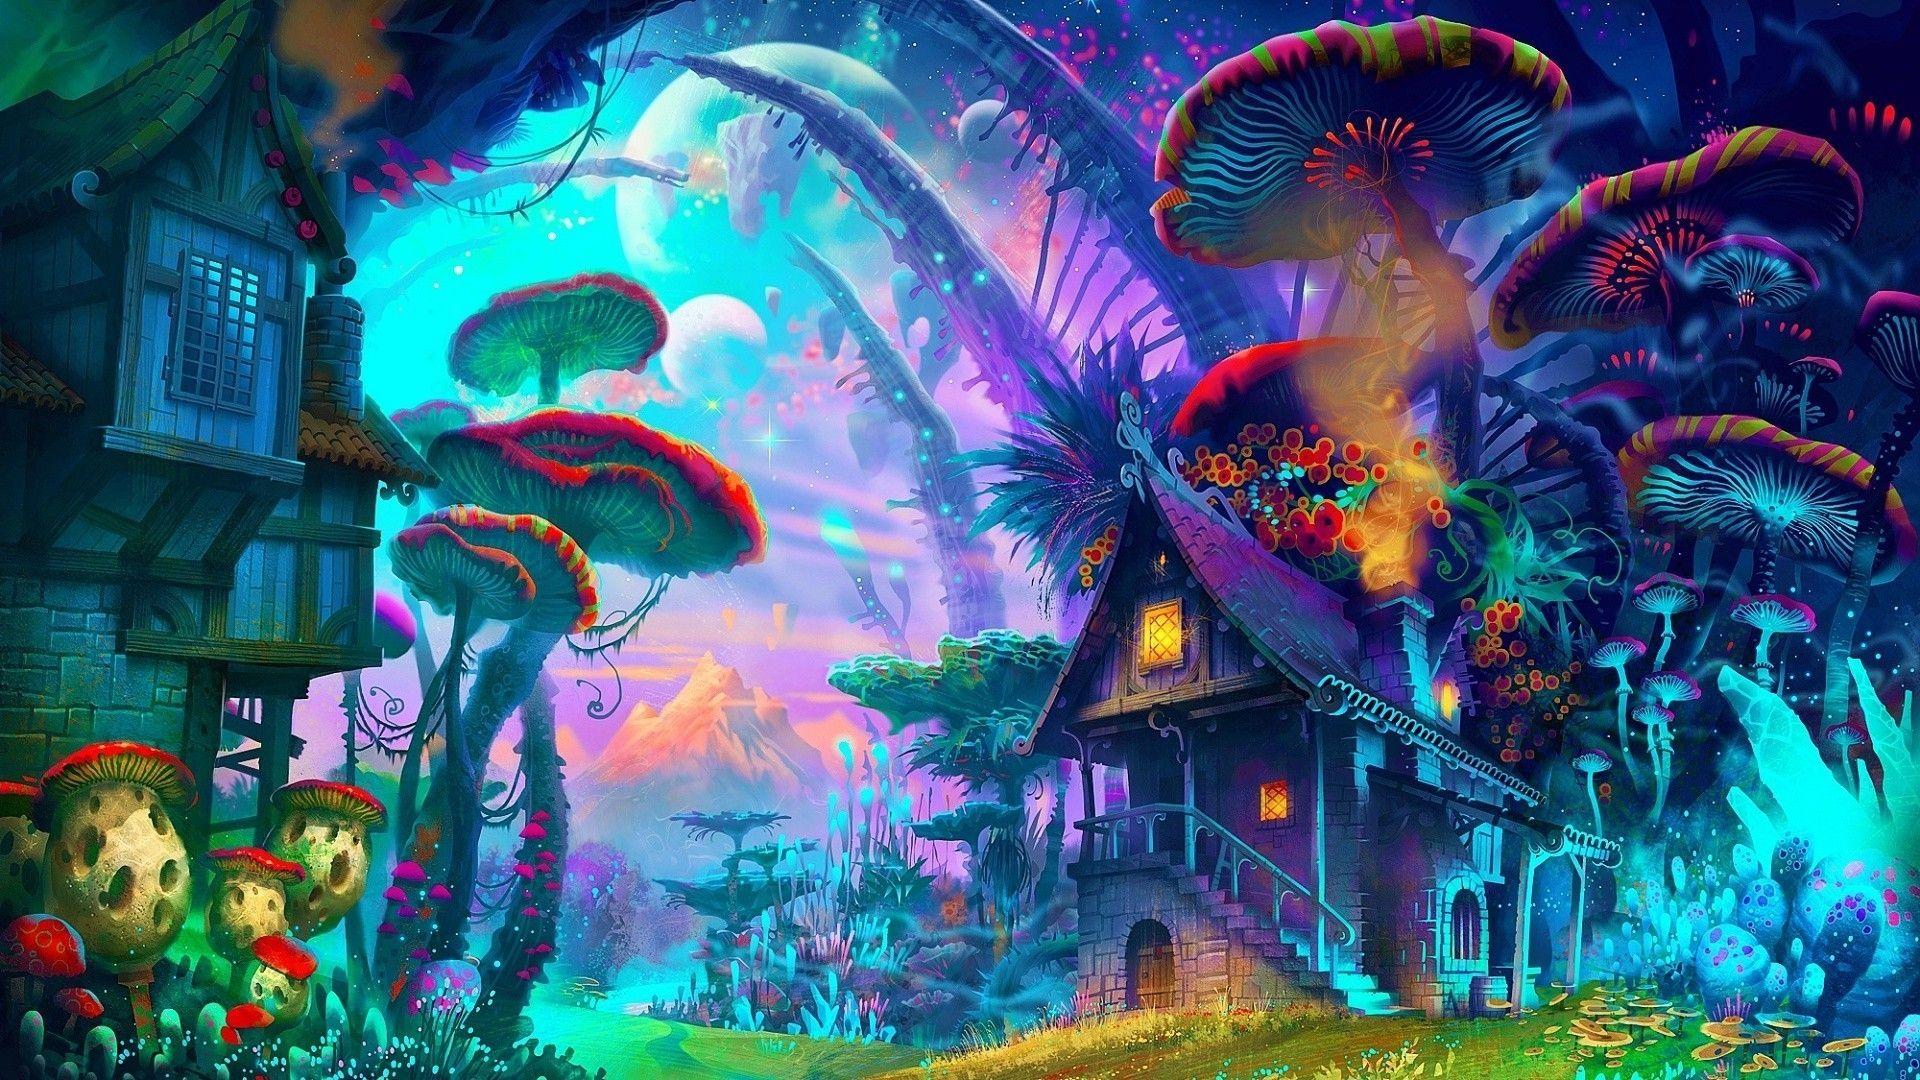 1920x1080 Mary Jane Weed Wallpaper Trippy - Rick And Morty Mushroom World